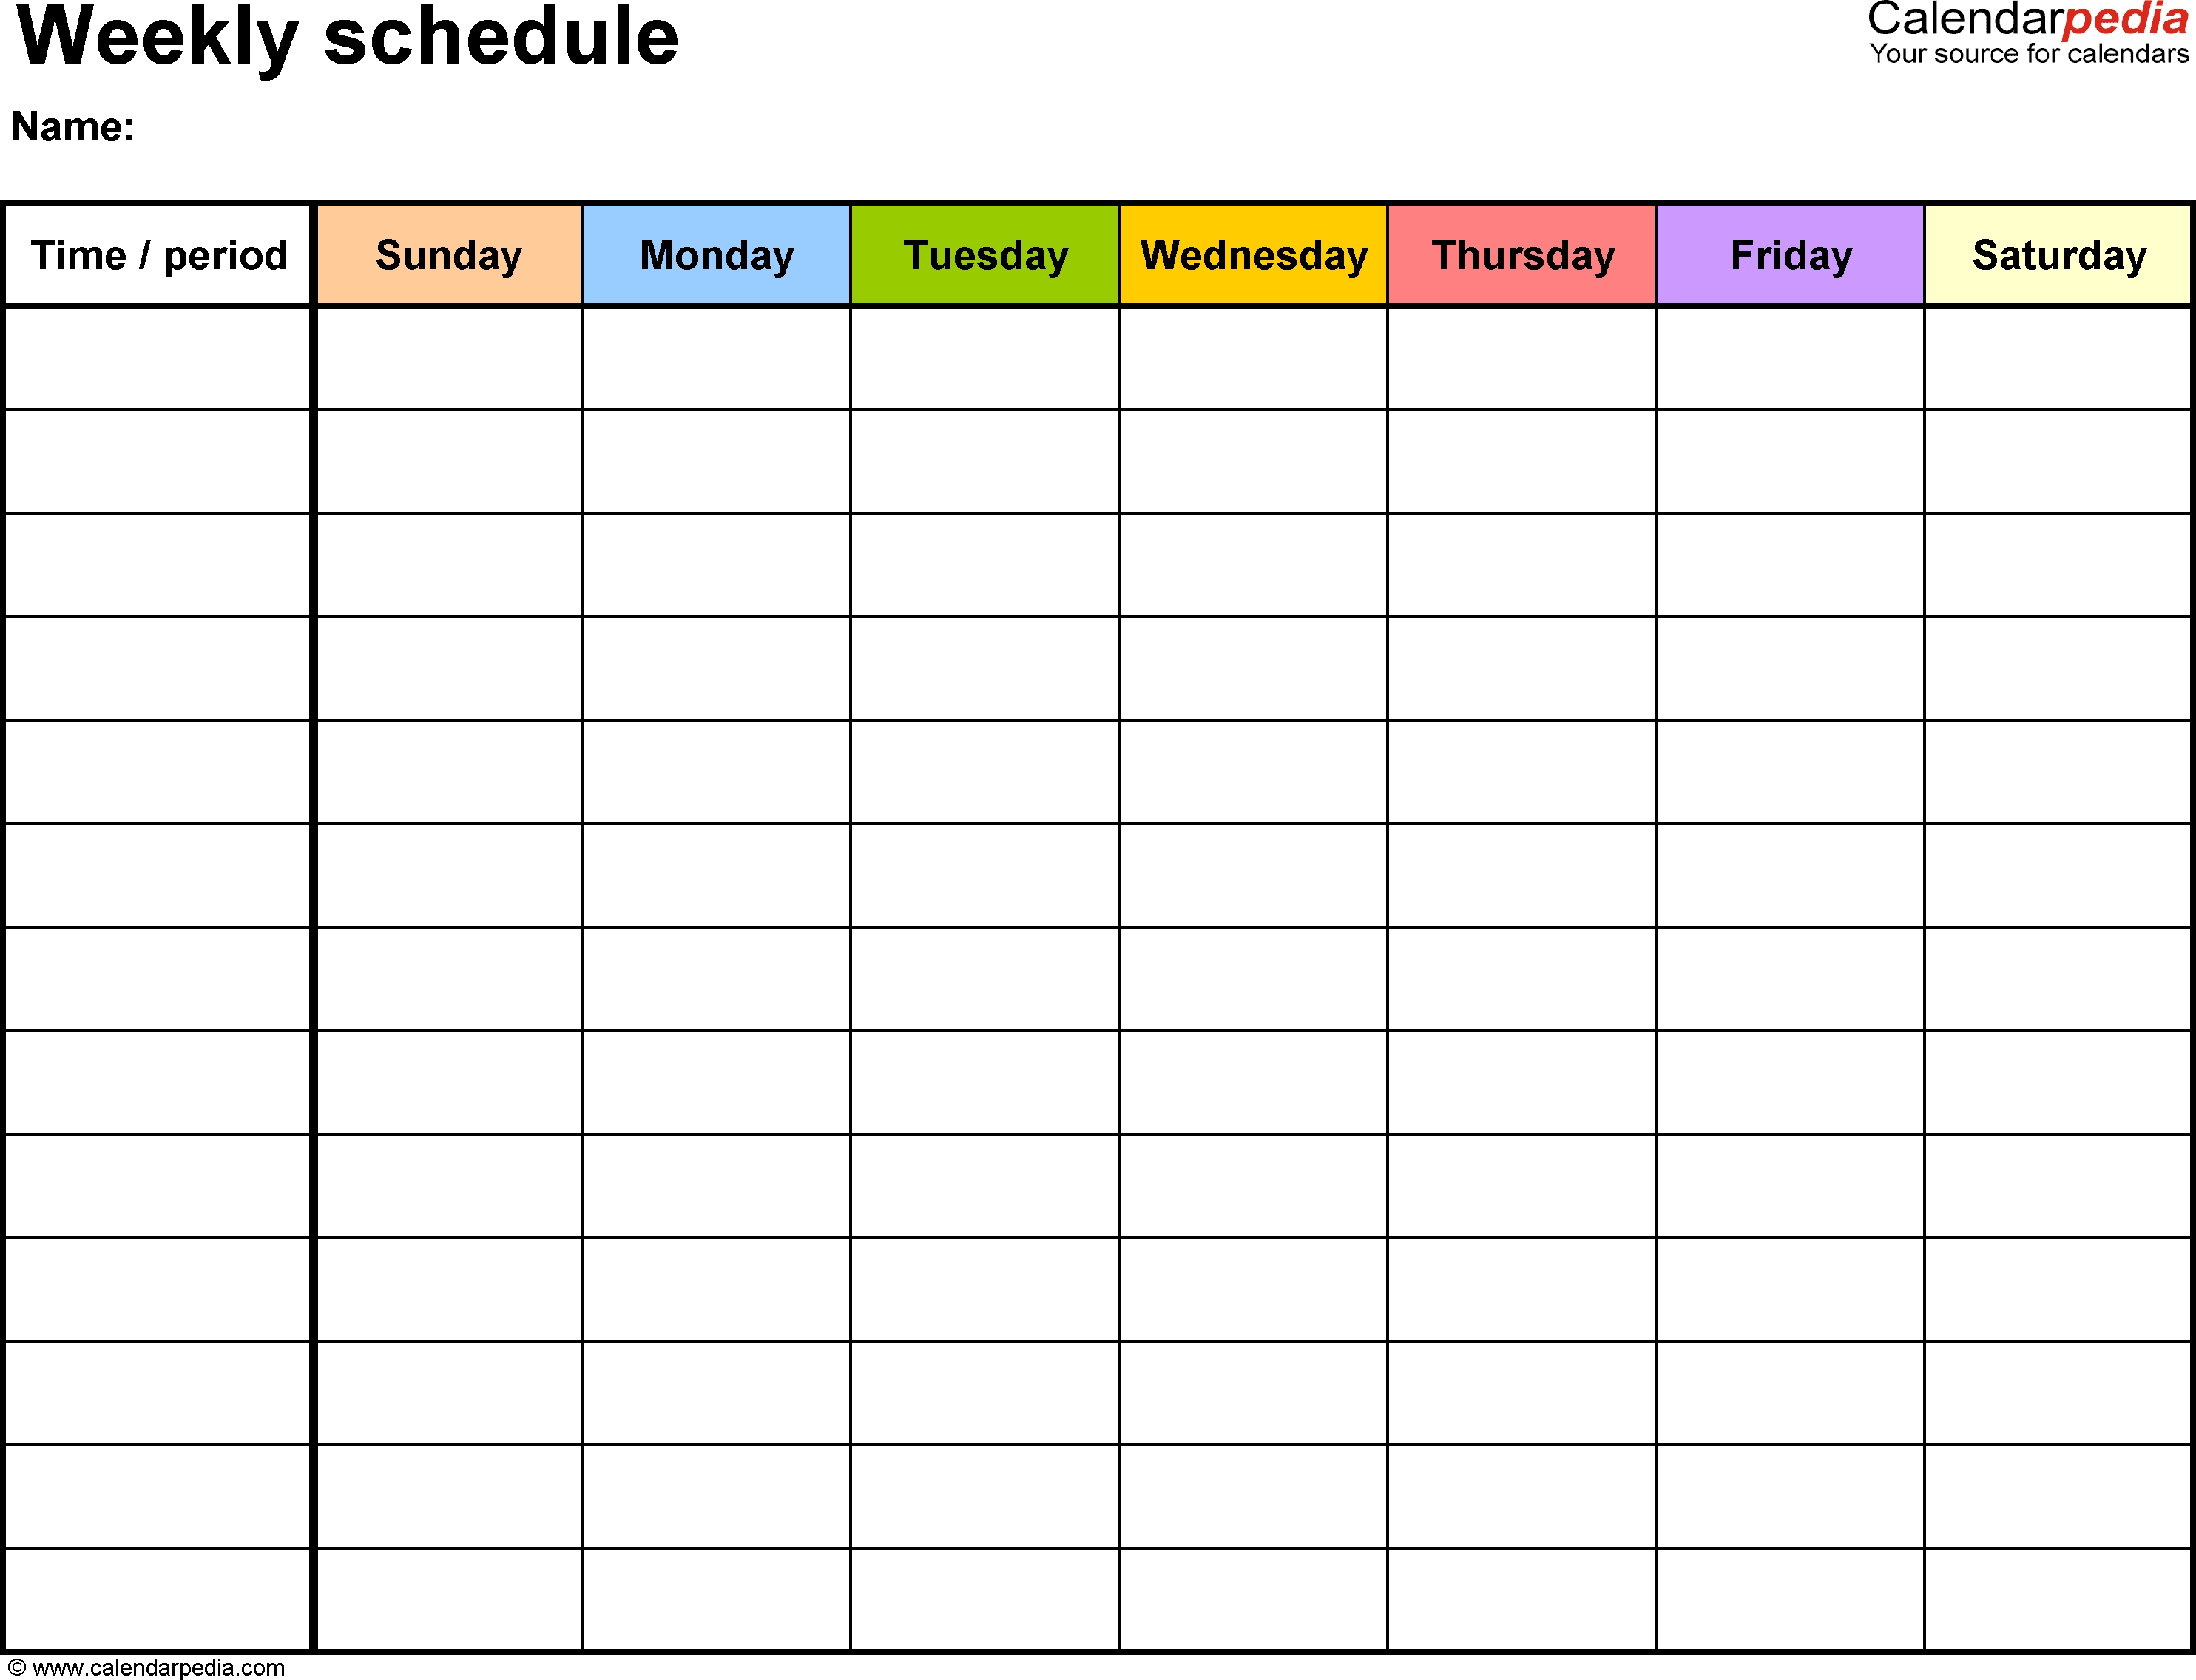 Free Weekly Schedule Templates For Pdf - 18 Templates with regard to Printable Weekly Planner Calendar Template